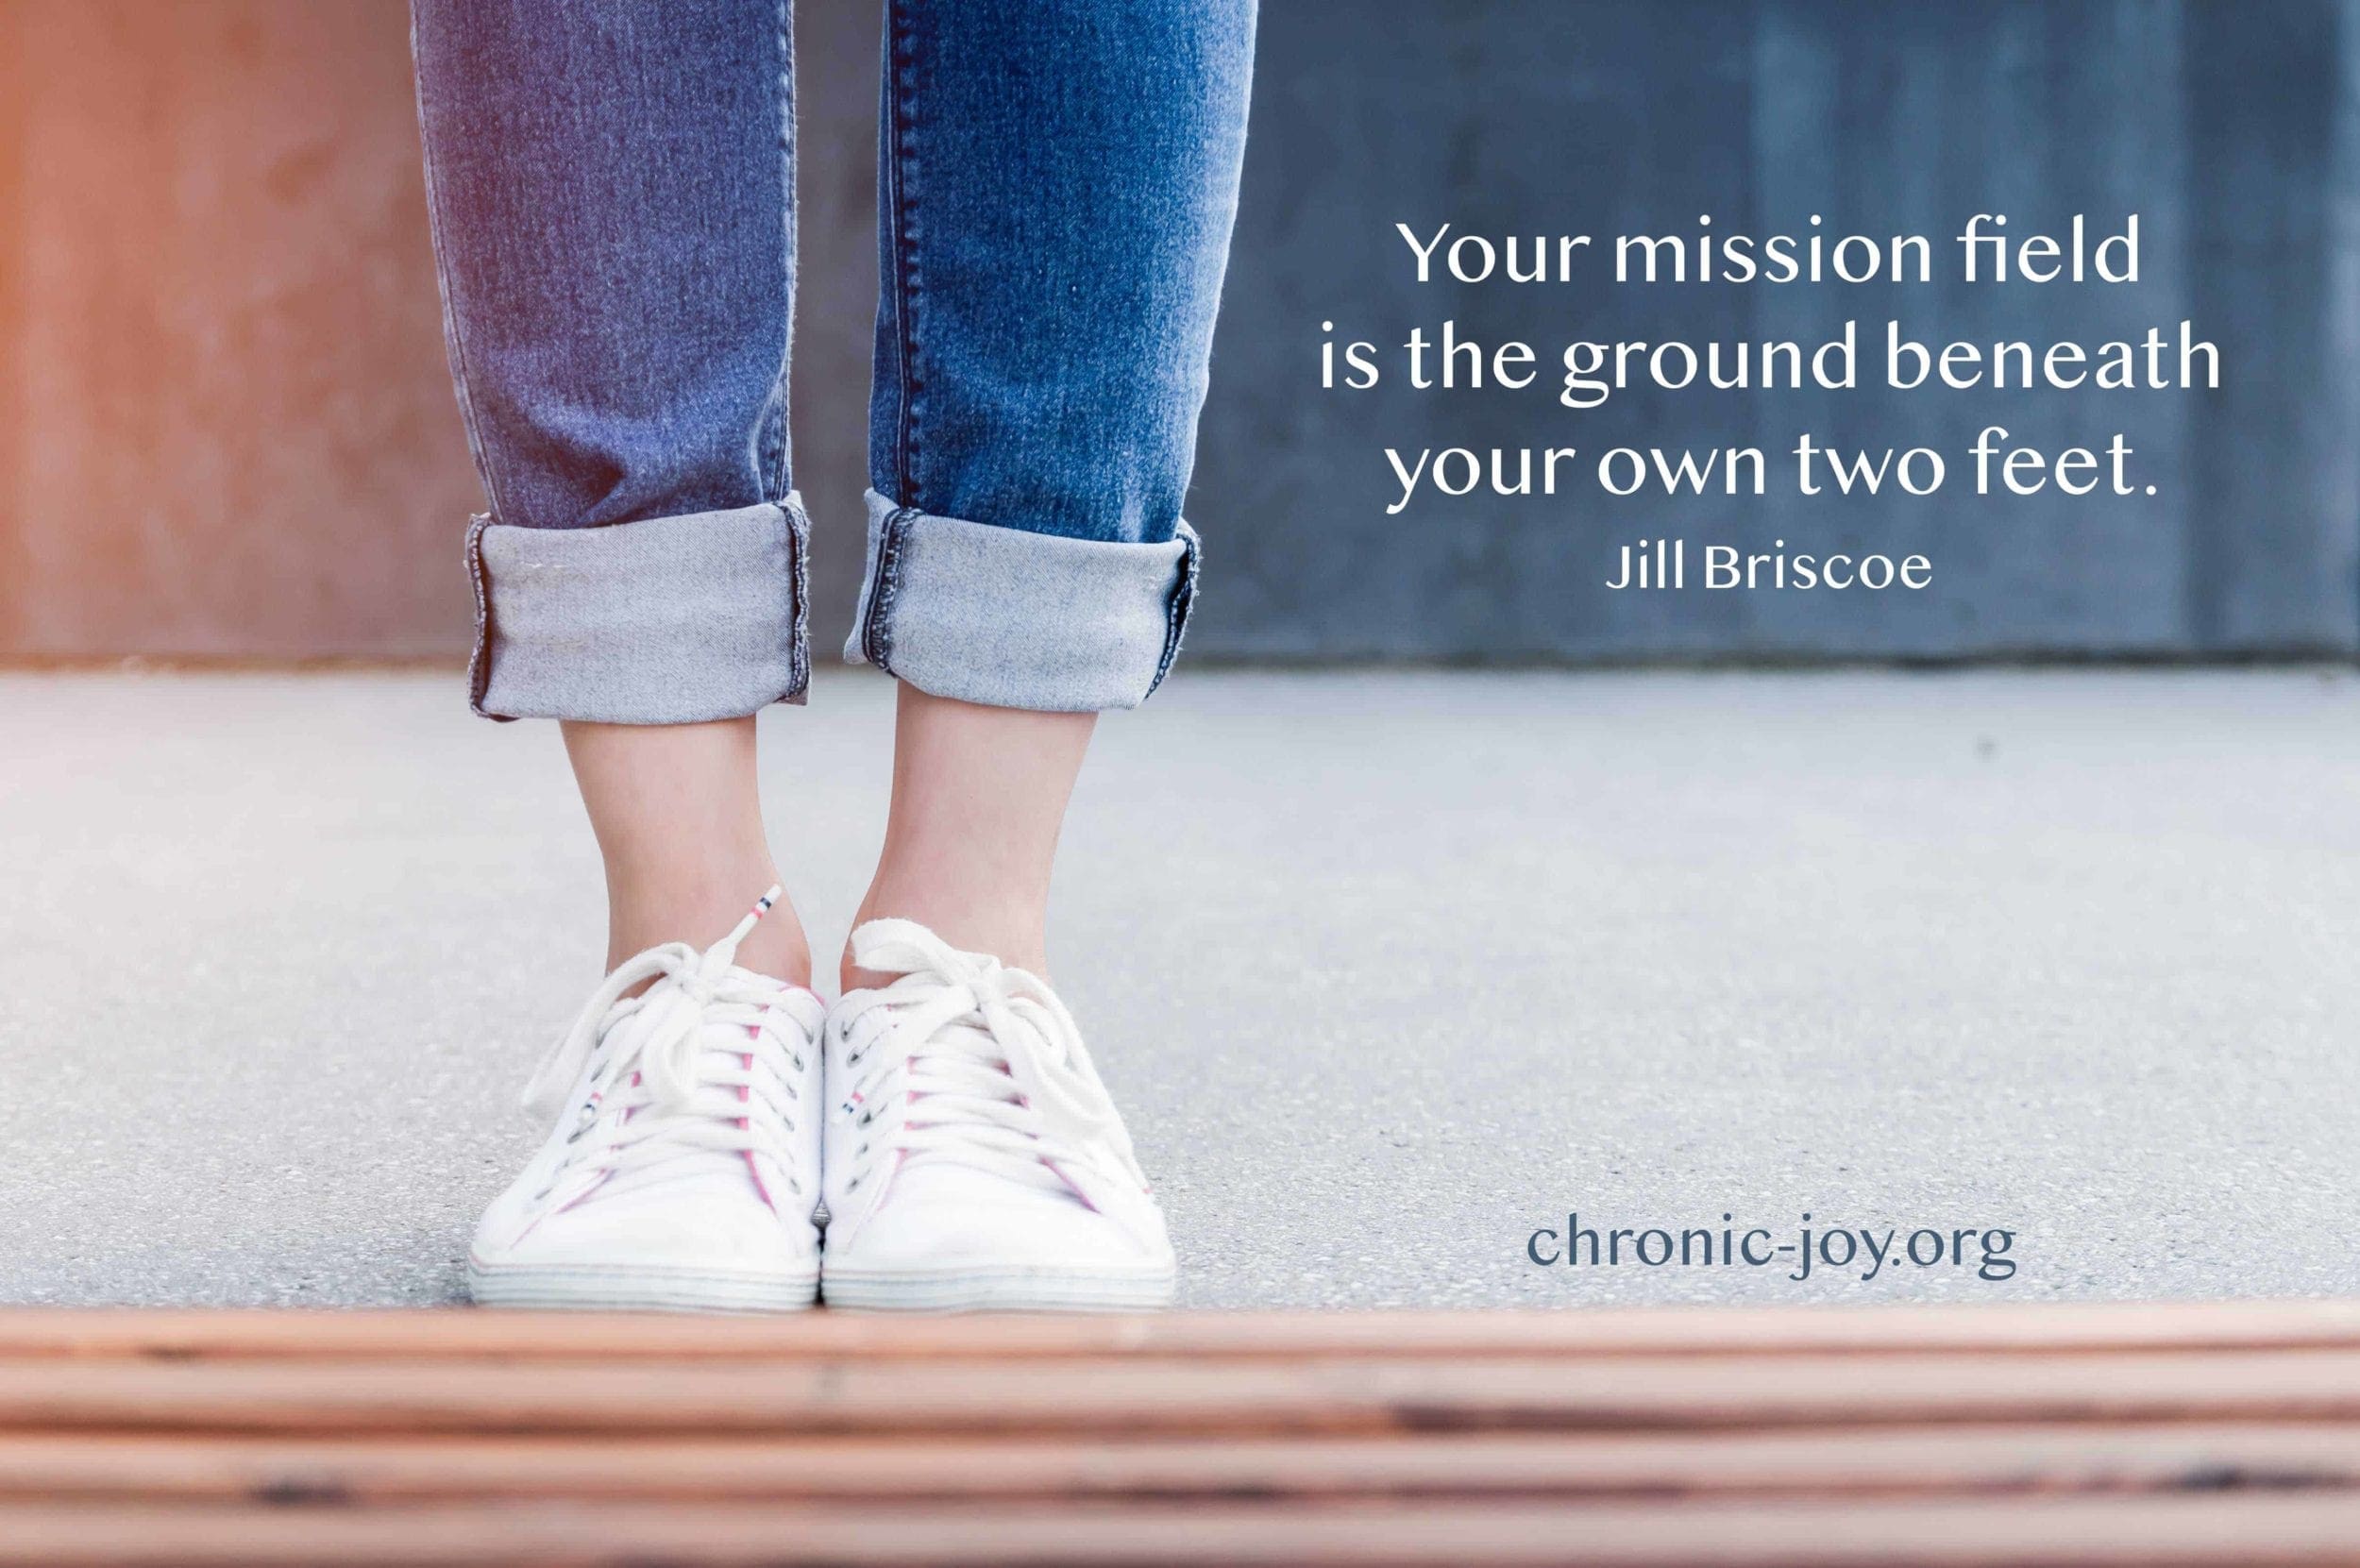 "Your mission field is the ground between your own two feet." Jill Briscoe